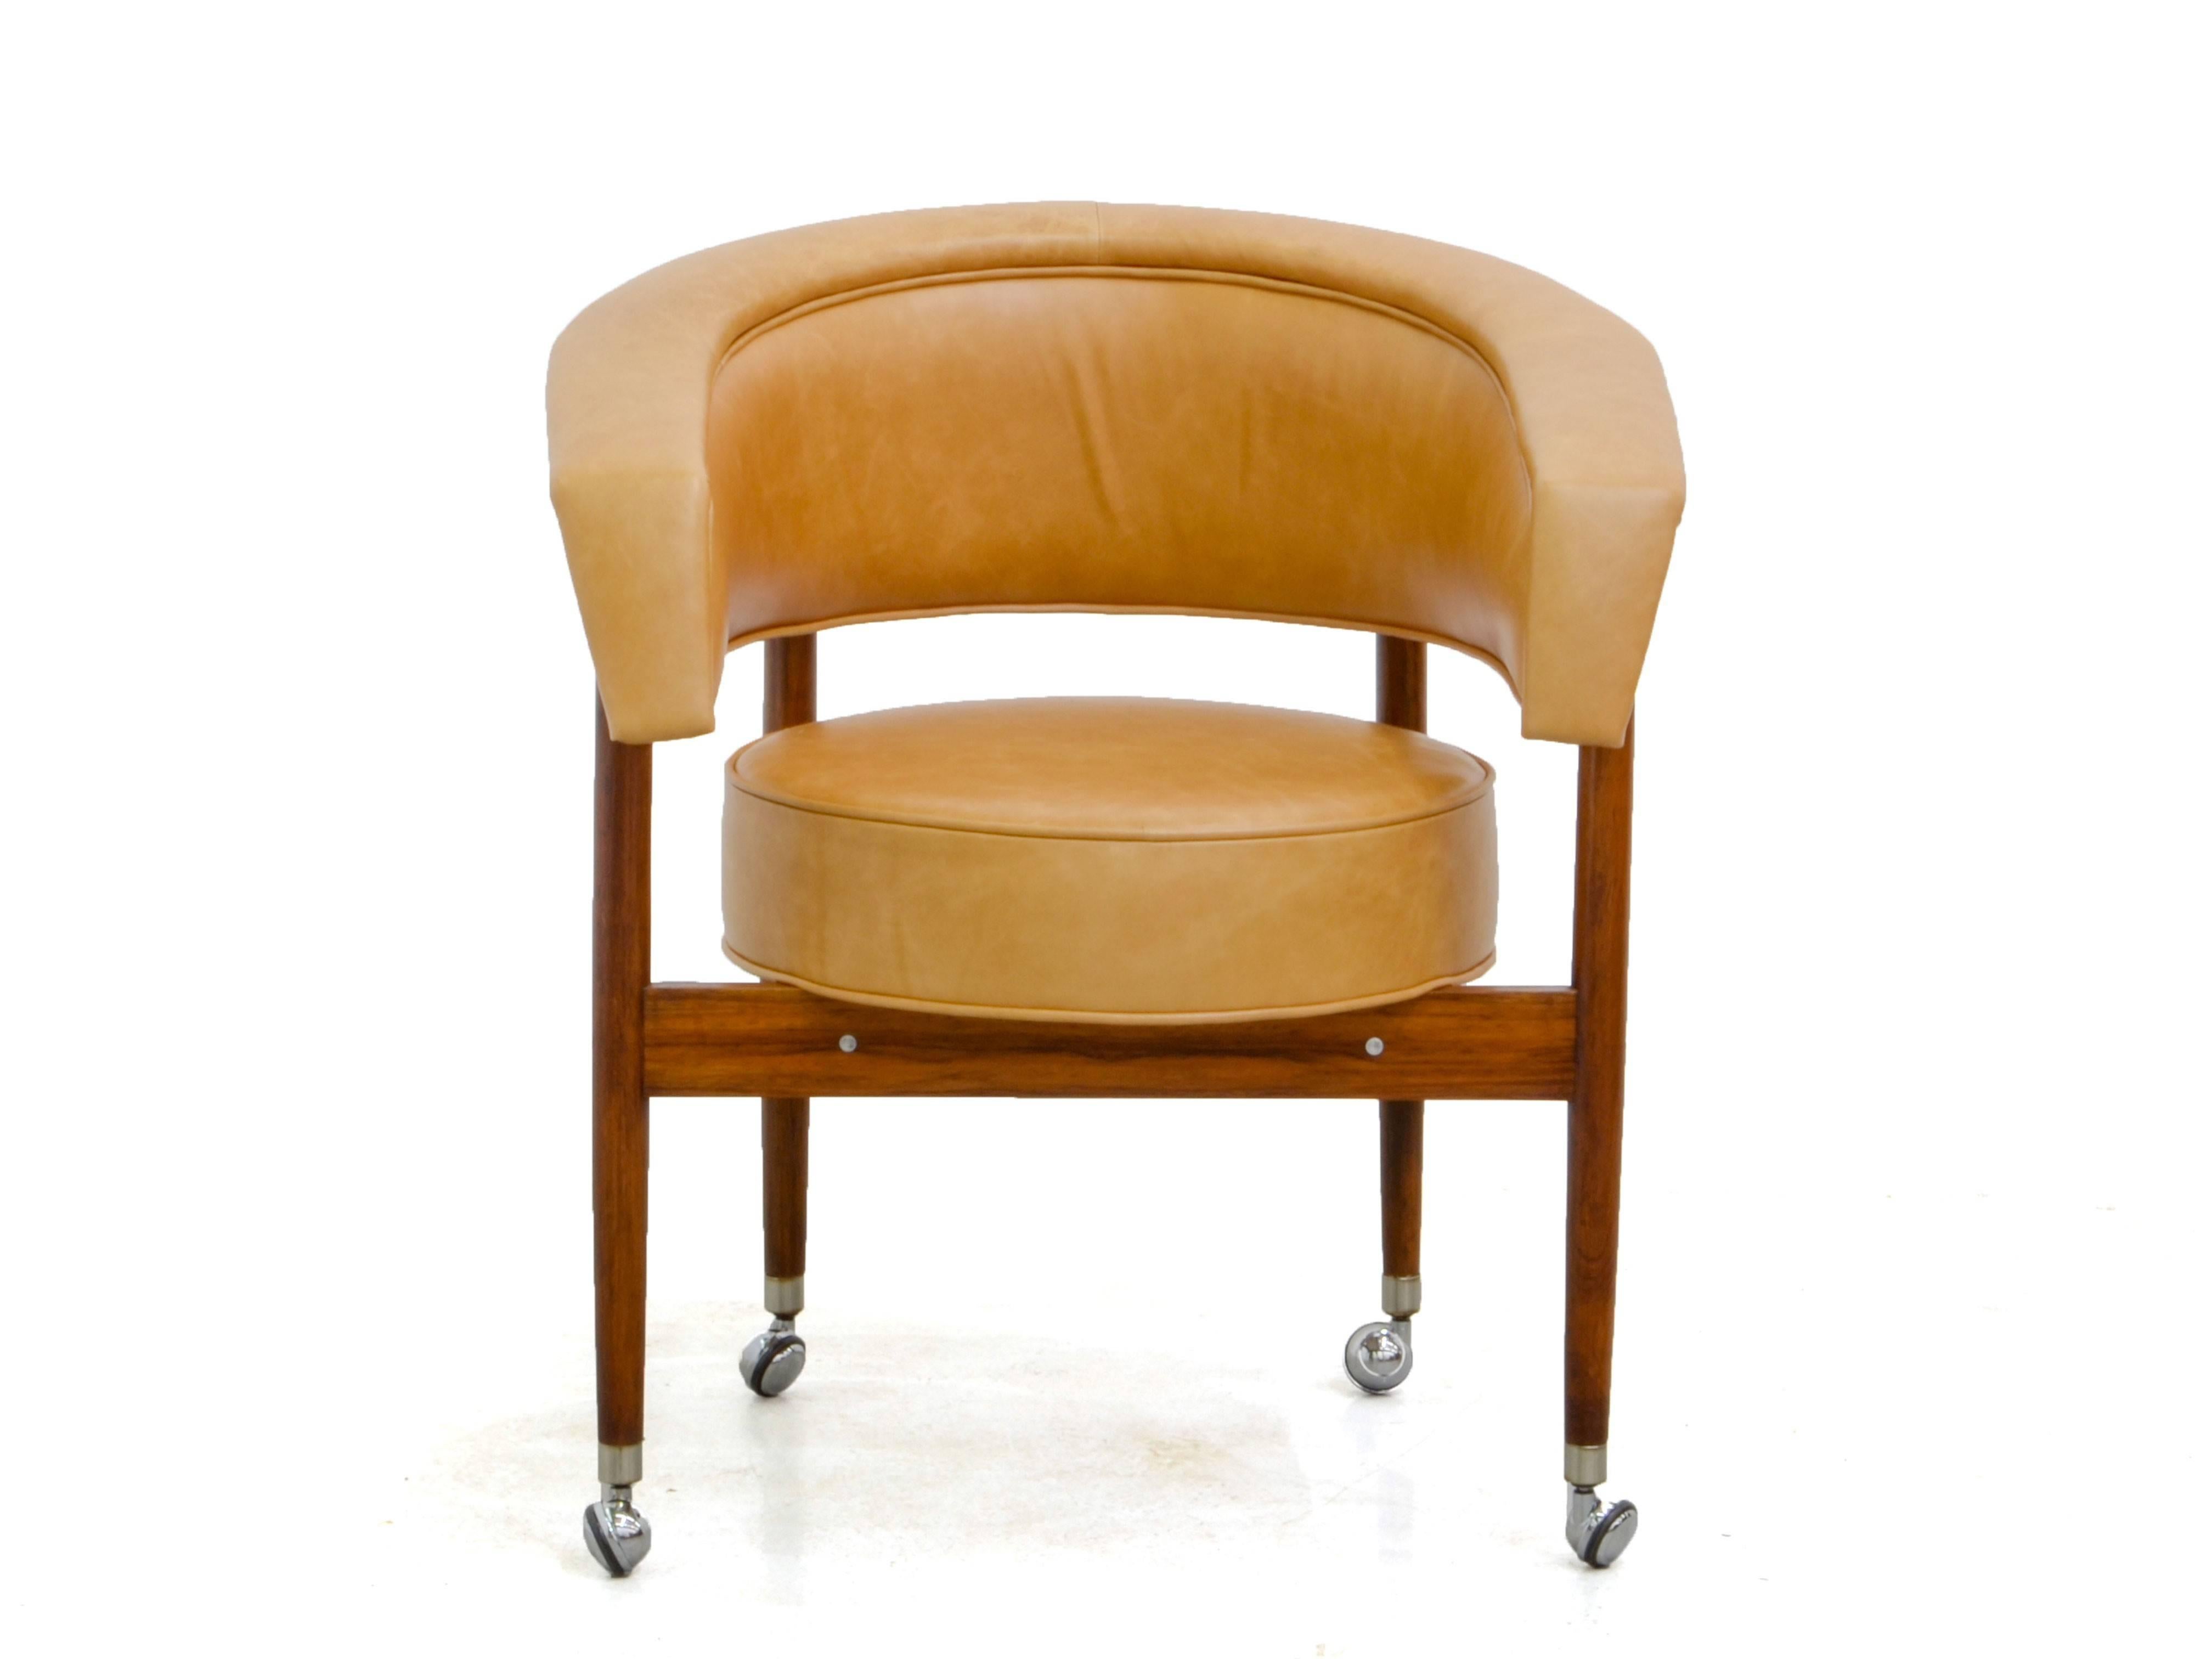 sergio rodrigues chair